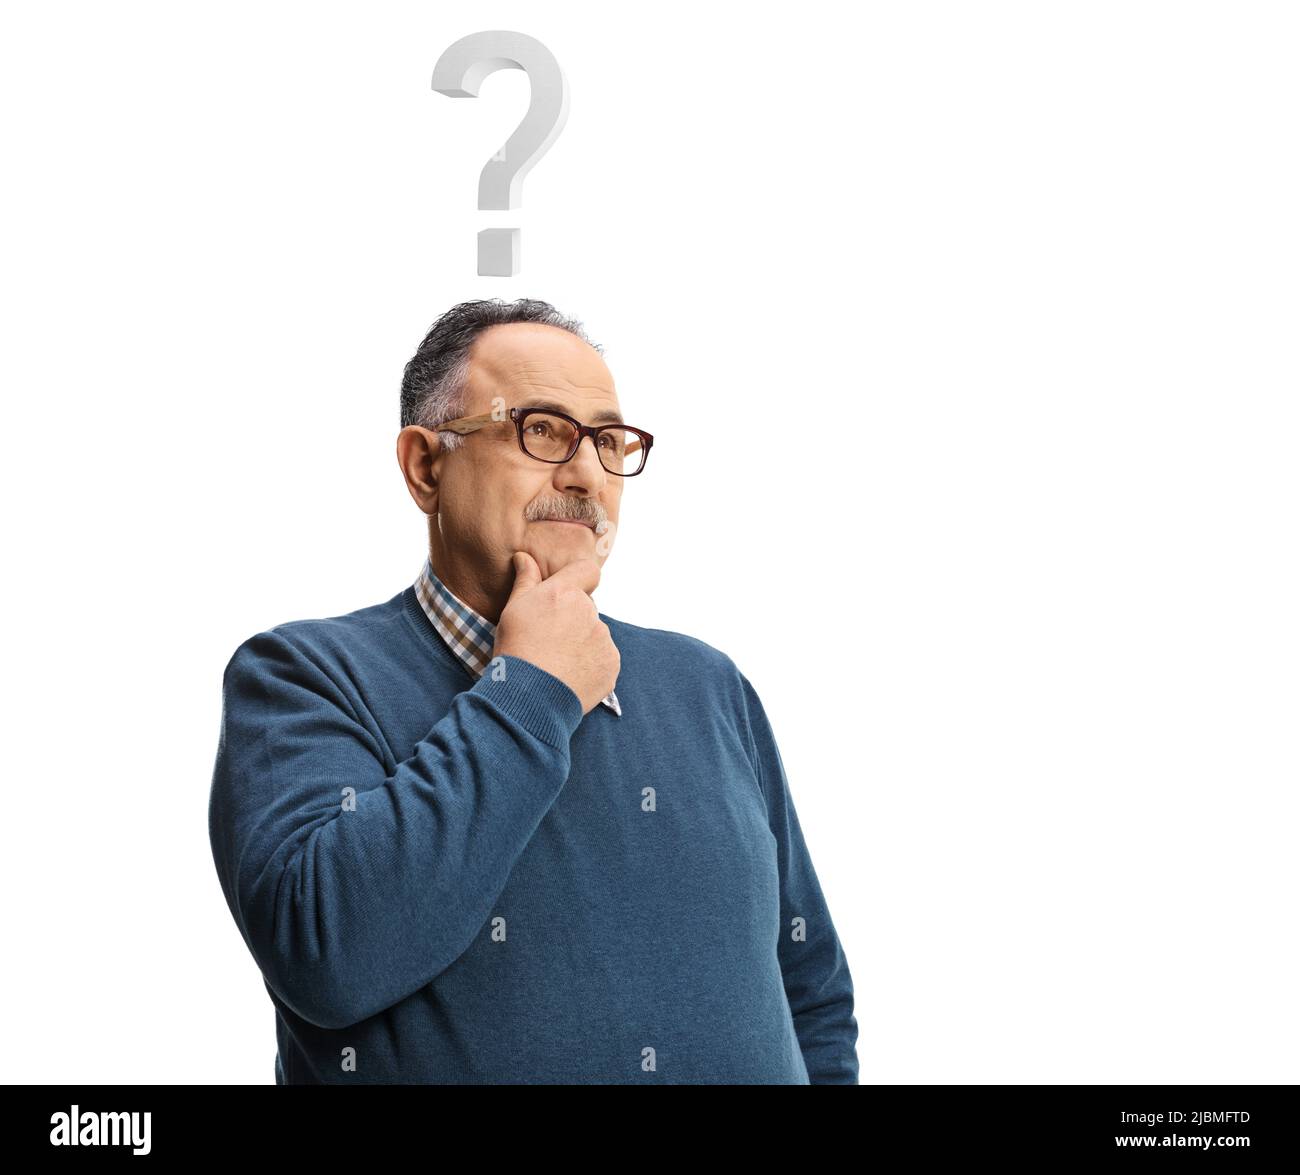 https://c8.alamy.com/comp/2JBMFTD/pensive-mature-man-standing-and-thinking-with-a-question-mark-above-his-head-isolated-on-white-background-2JBMFTD.jpg